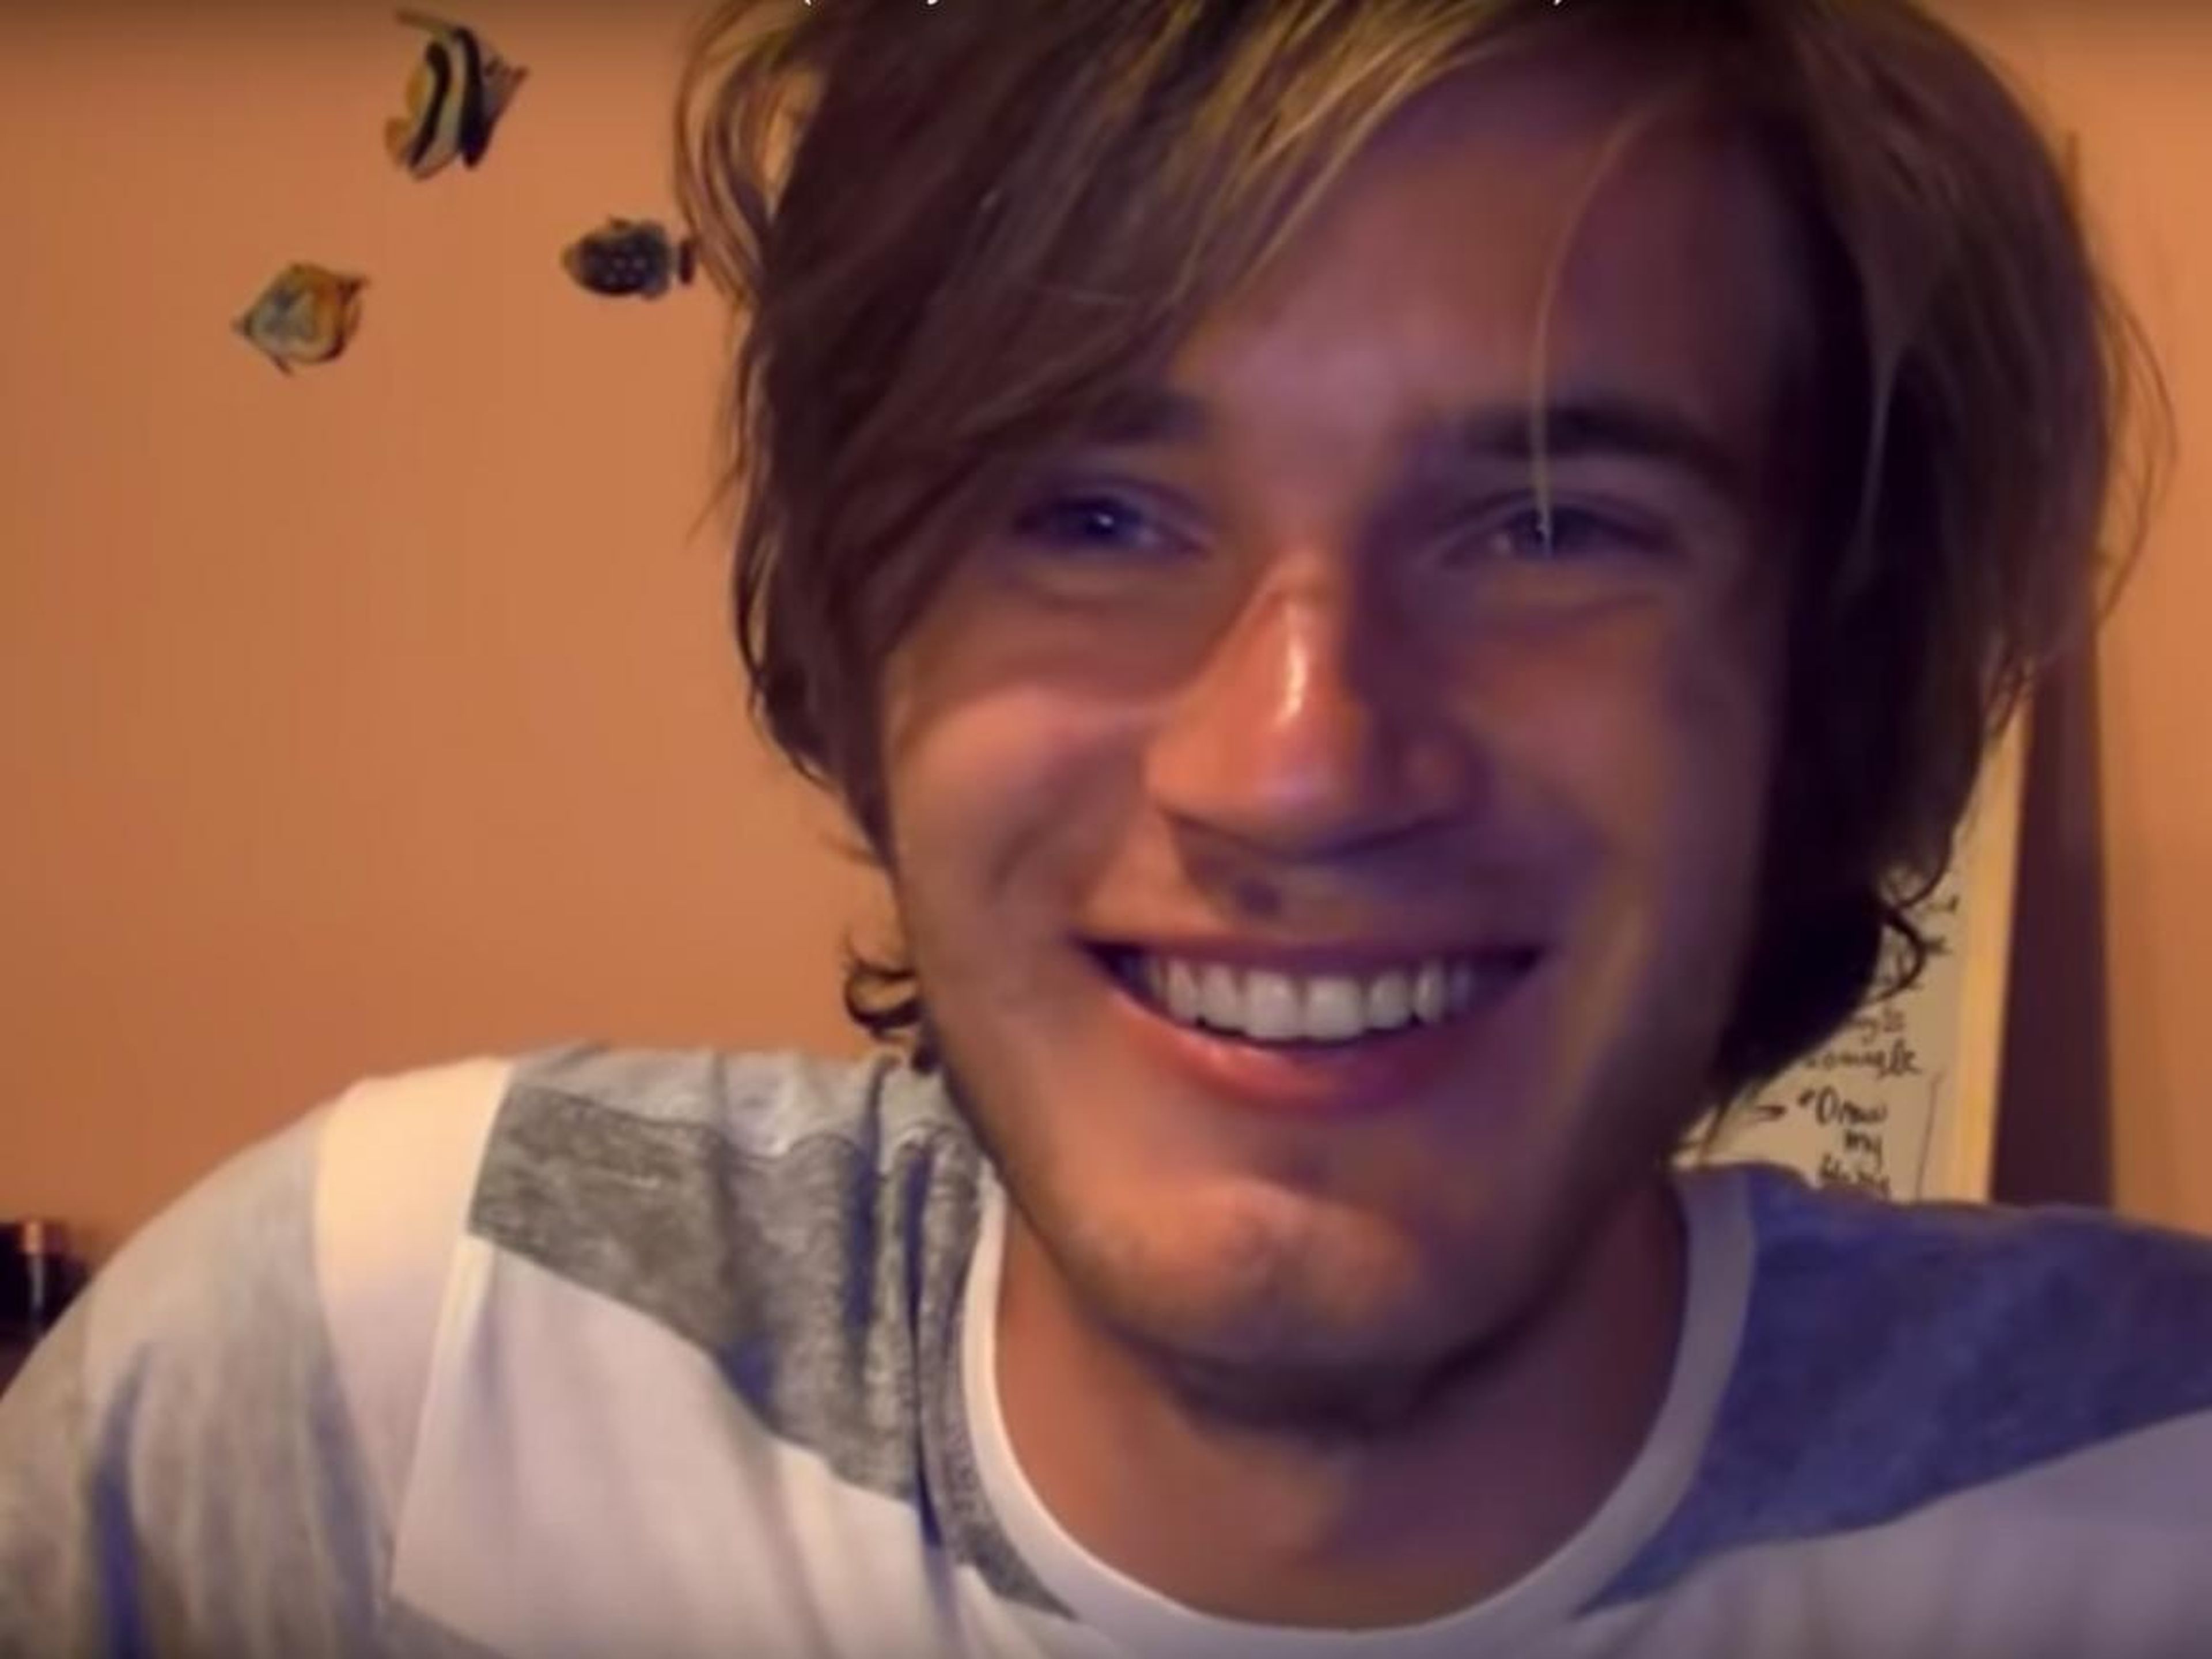 Kjellberg expanded into content beyond video games early on, including his weekly vlog series called "Fridays with PewDiePie." PewDiePie reached his first million subscribers in July 2012, and later that year signed with a